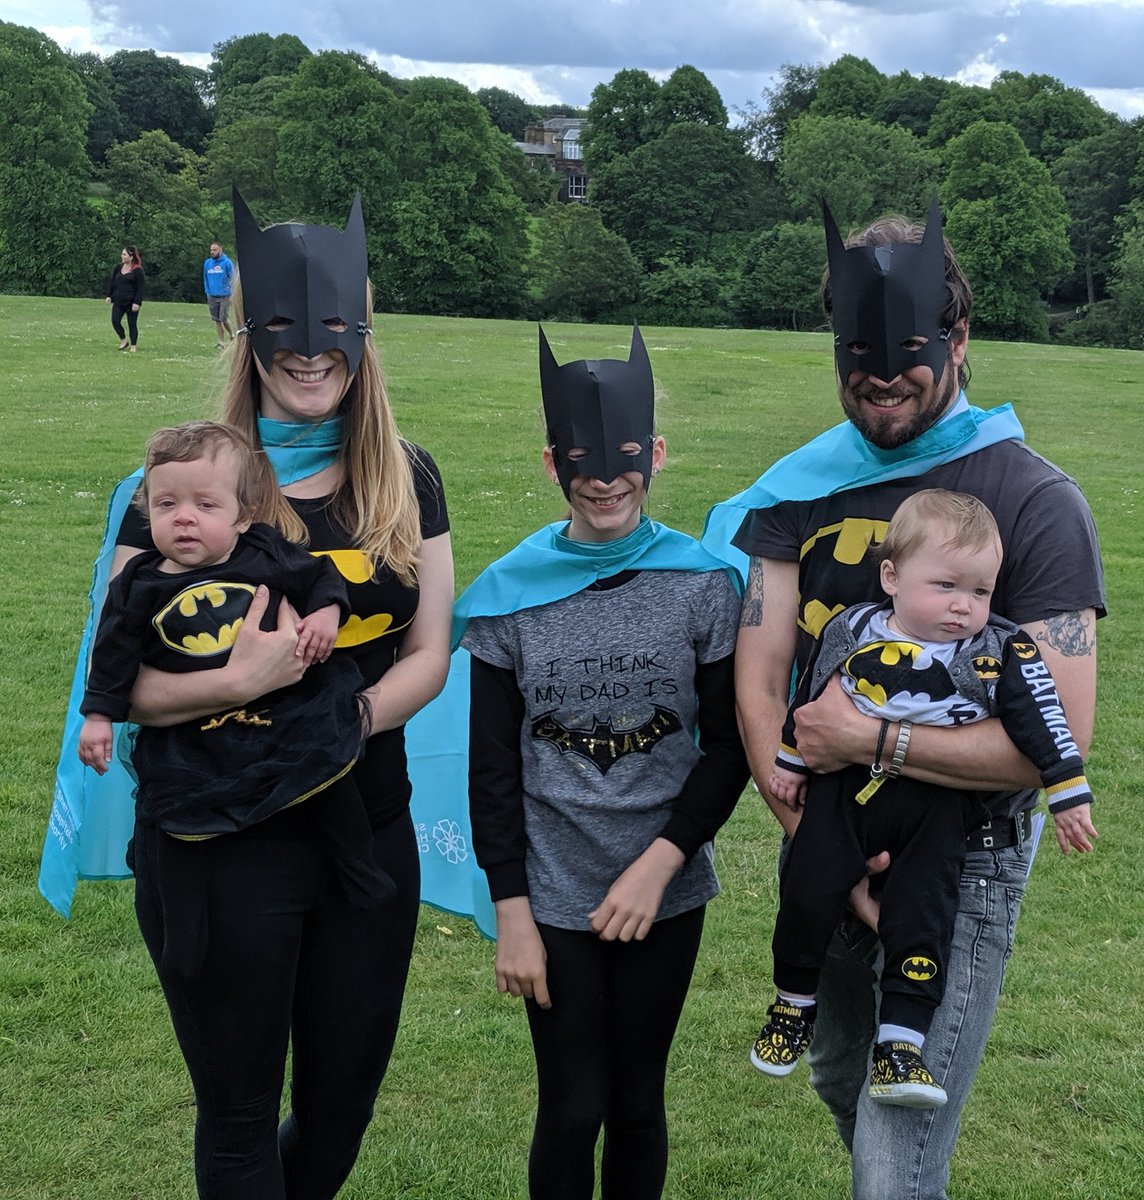 We completed the #jessopssuperheroes walk today and managed to raise £444 for #sheffieldhospitalscharity in the process. A huge thank you to all our sponsors